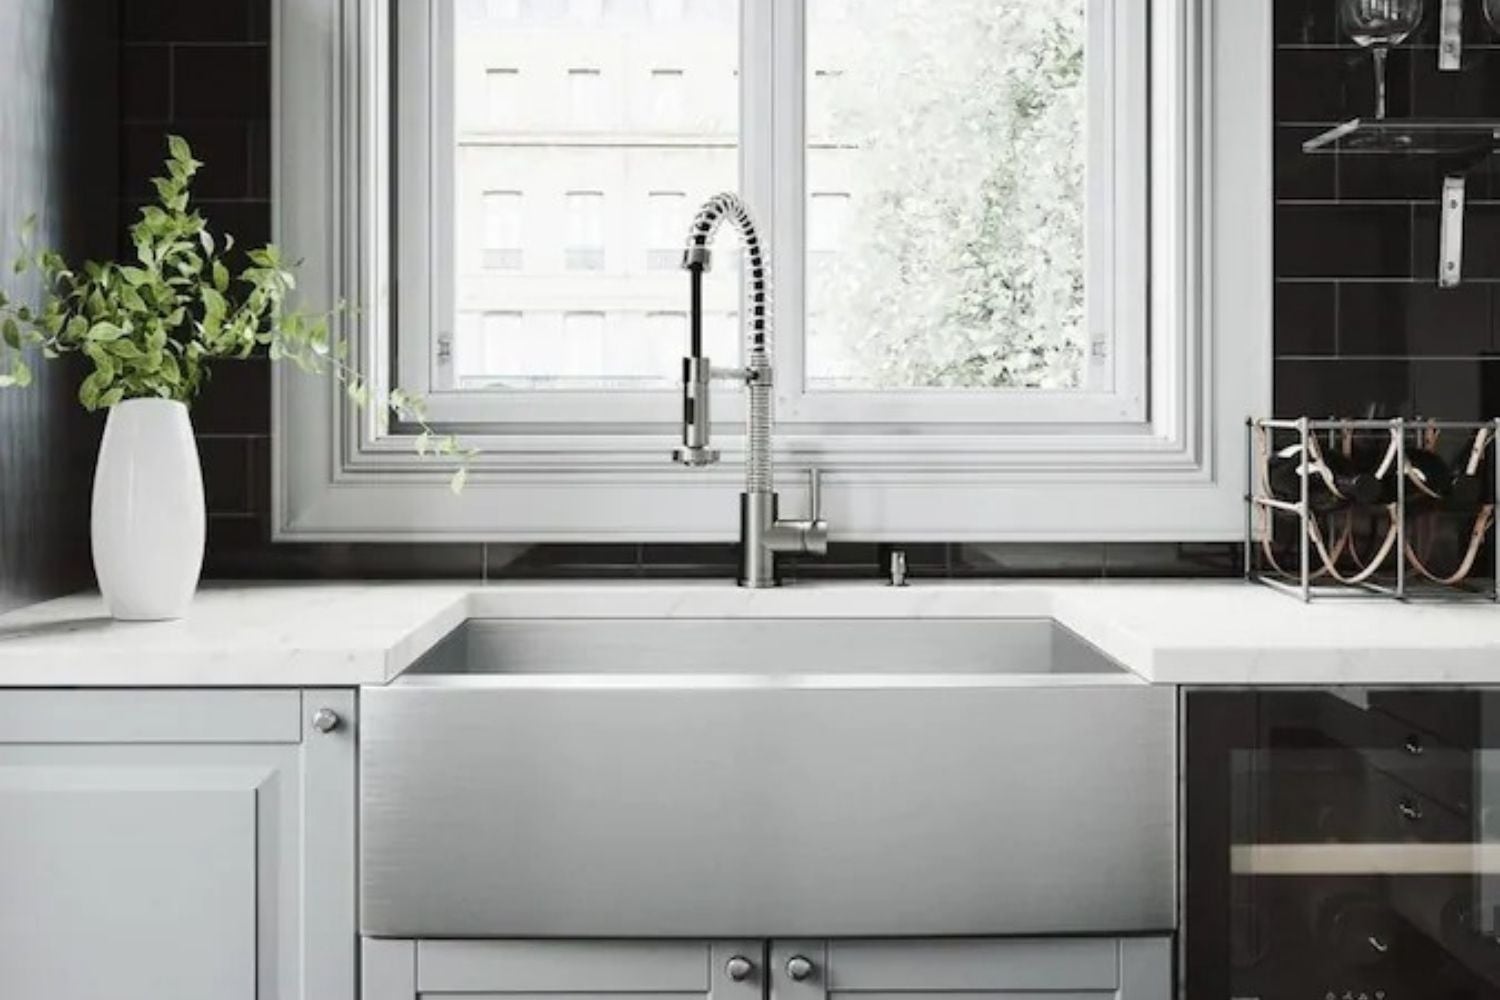 What are standard sink sizes